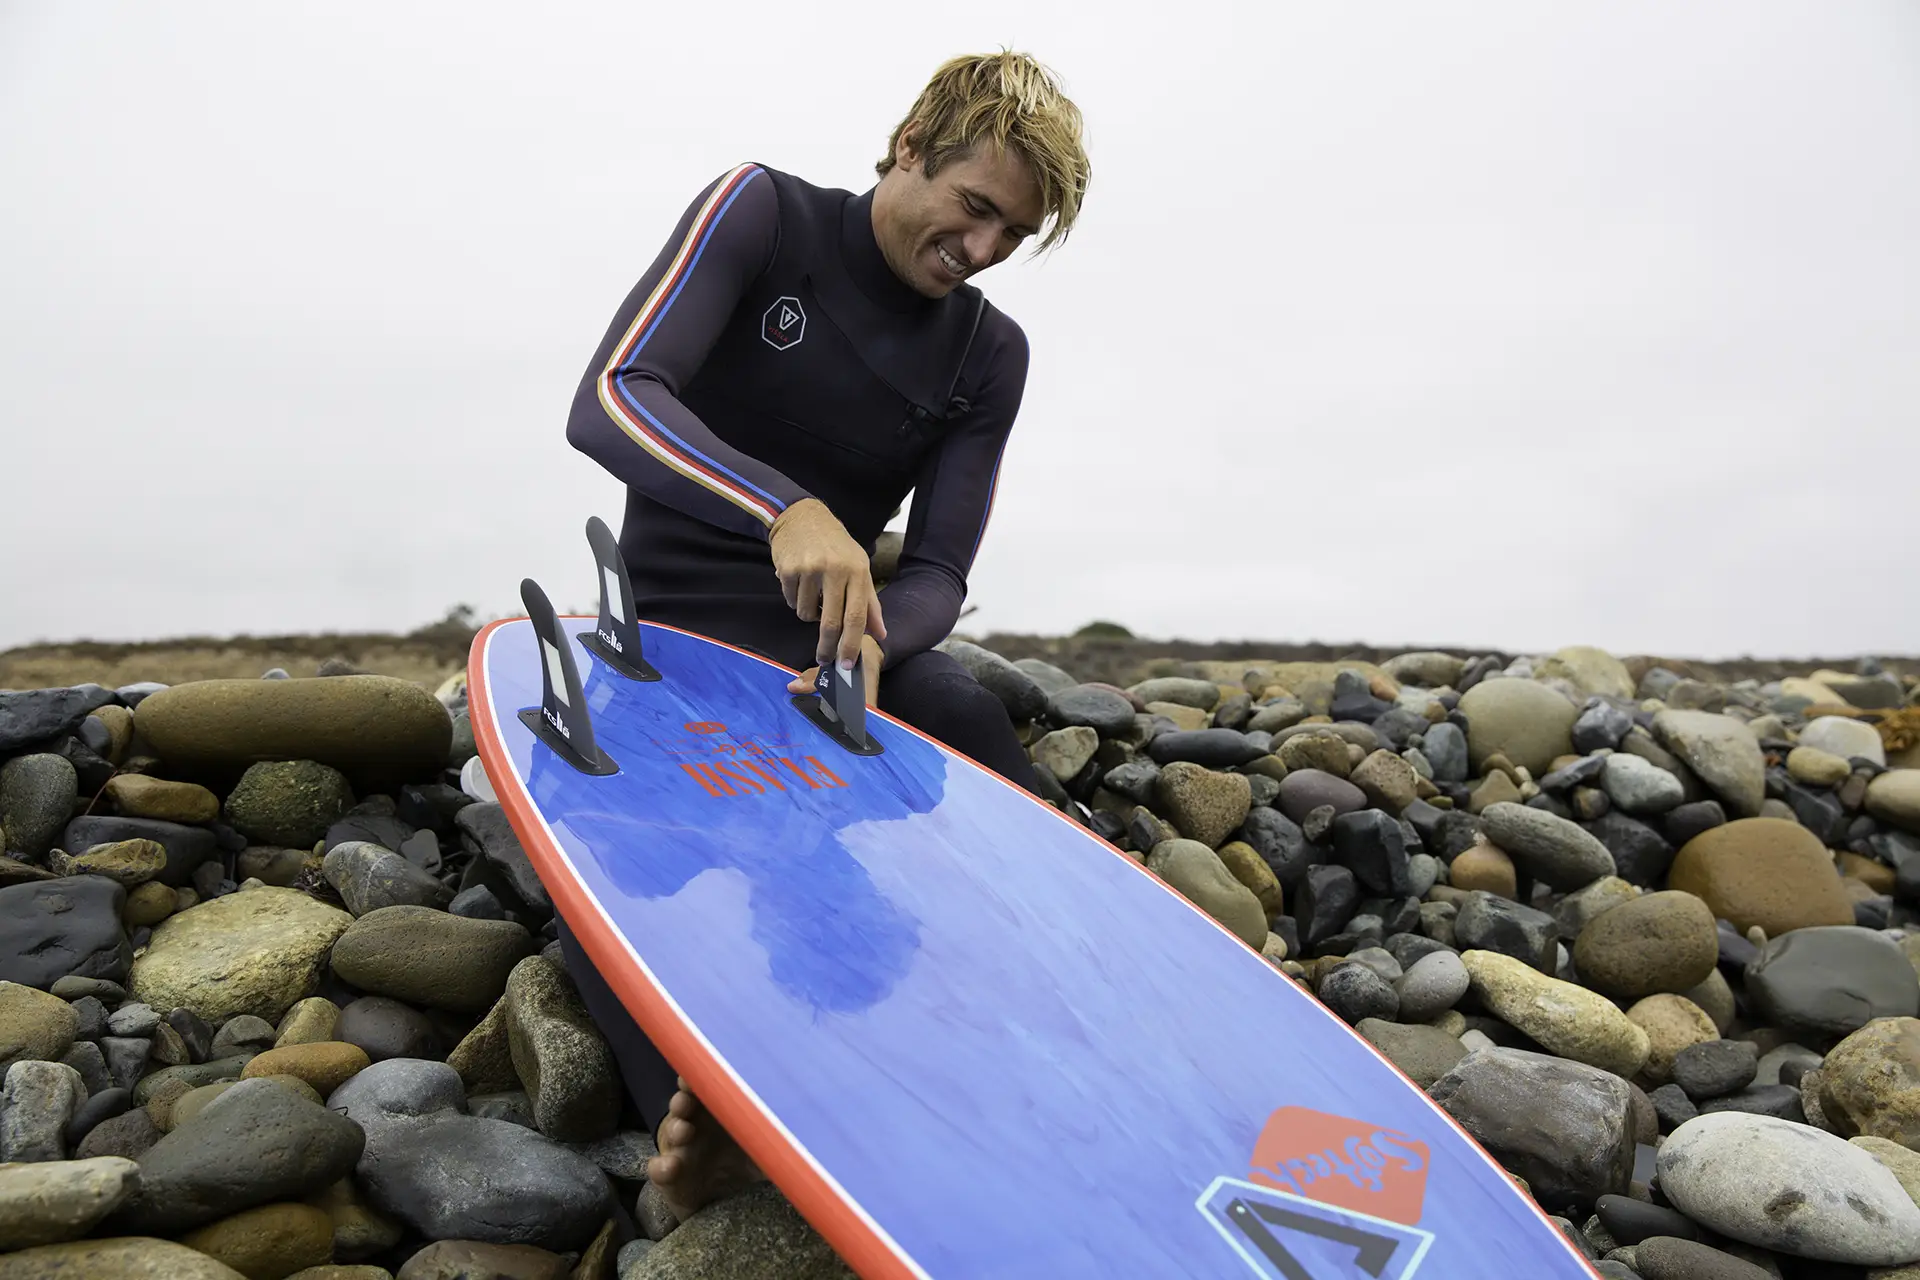 Essential Surf Equipment for Beginners: Your Gateway to Surfing